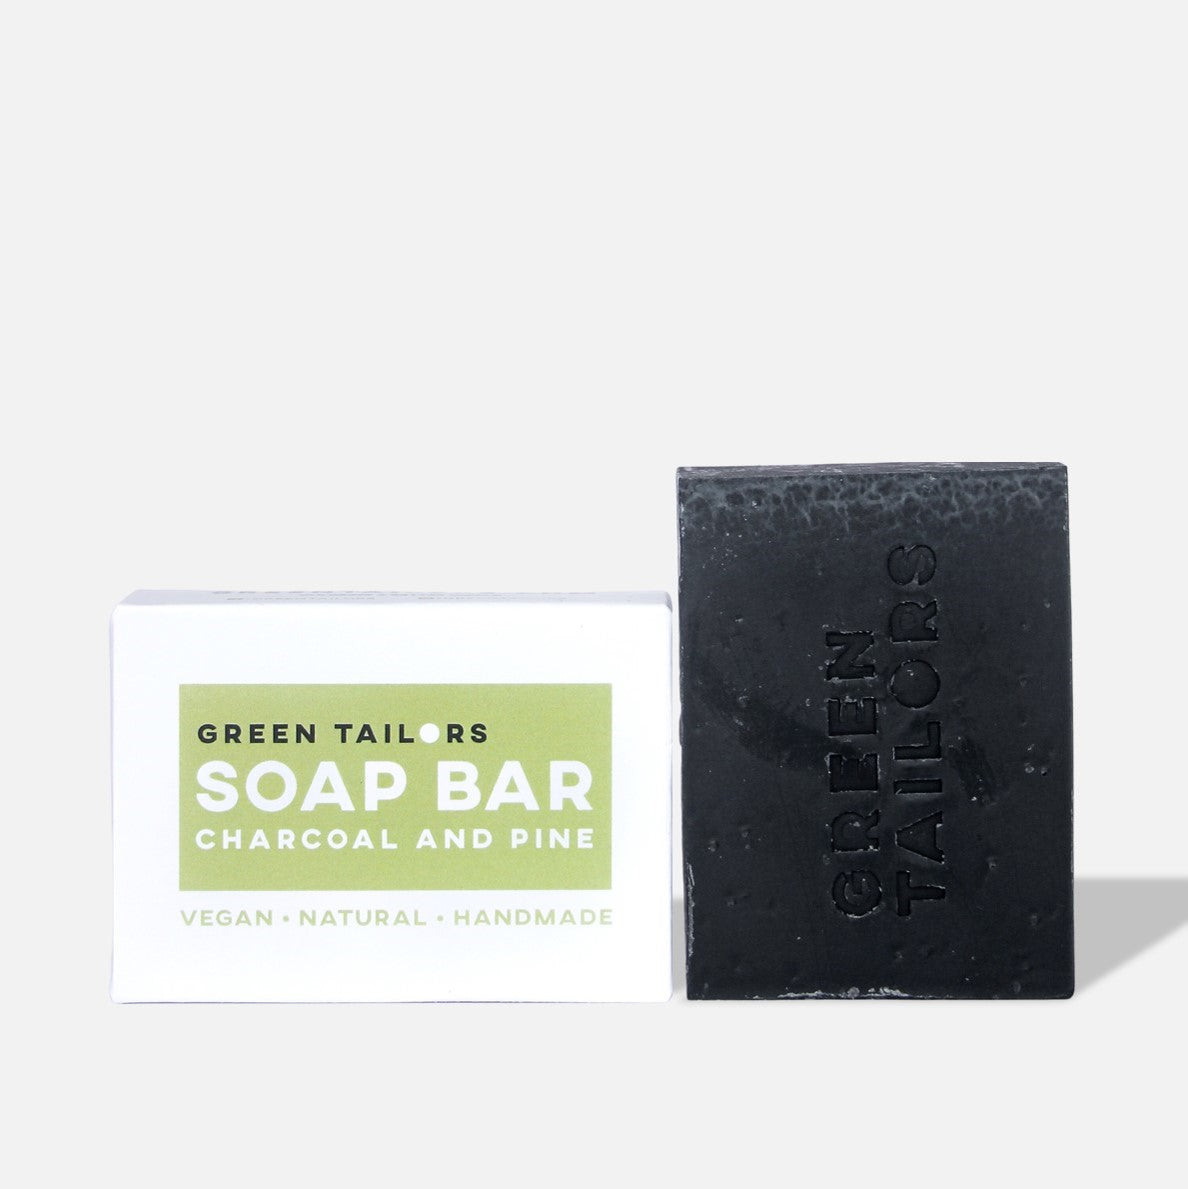 SOAP BAR | Charcoal and Pine